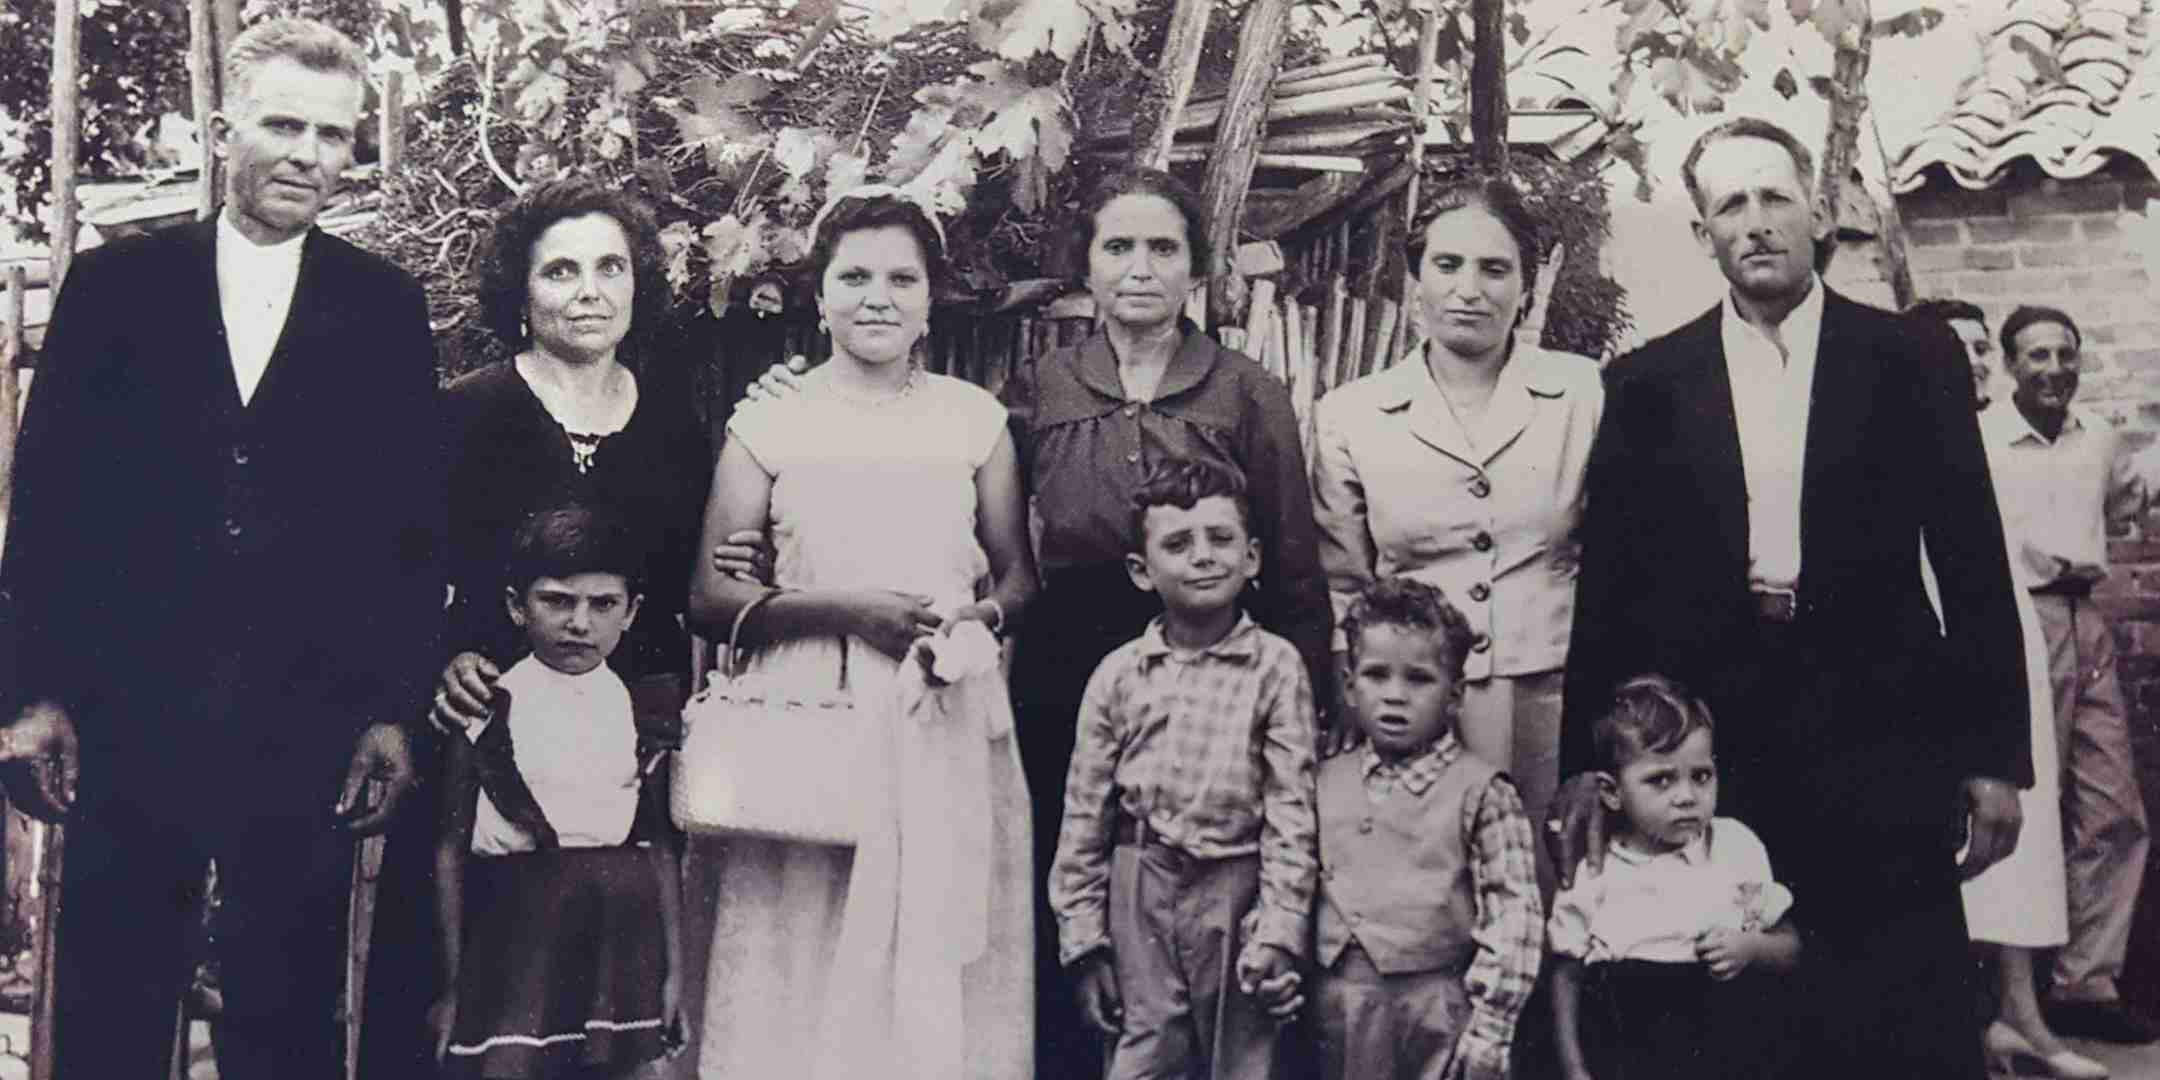 Annarosa Coluccio (third from left) with her parents (left) and mother-in-law (fourth from left) at her proxy marriage in Roccella Jonica, Calabria, Italy, 1956. Reproduced courtesy Isabella Coluccio